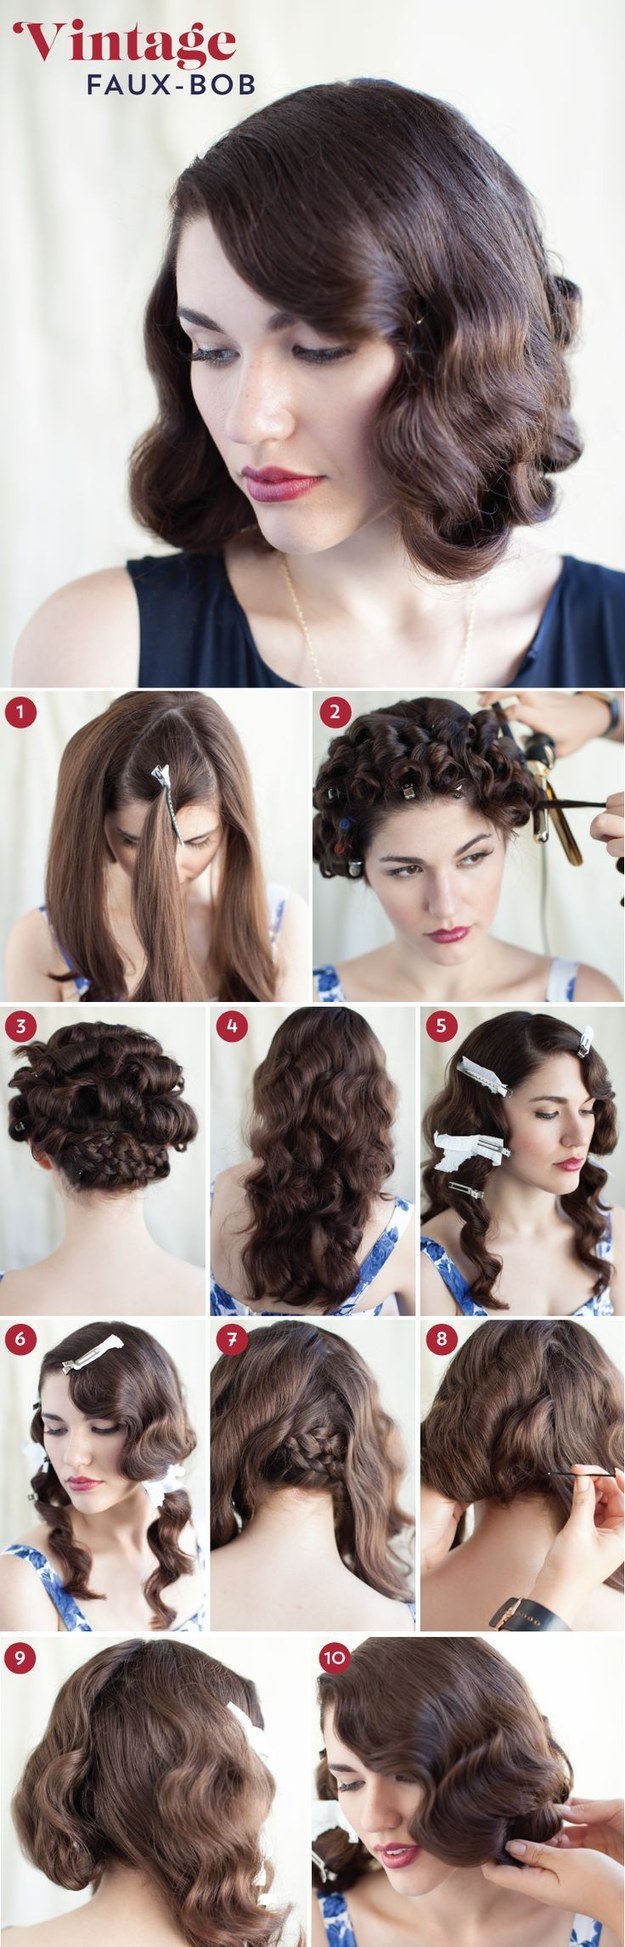 32 Vintage Hairstyle Tutorials You Should Not Miss | Styles Weekly